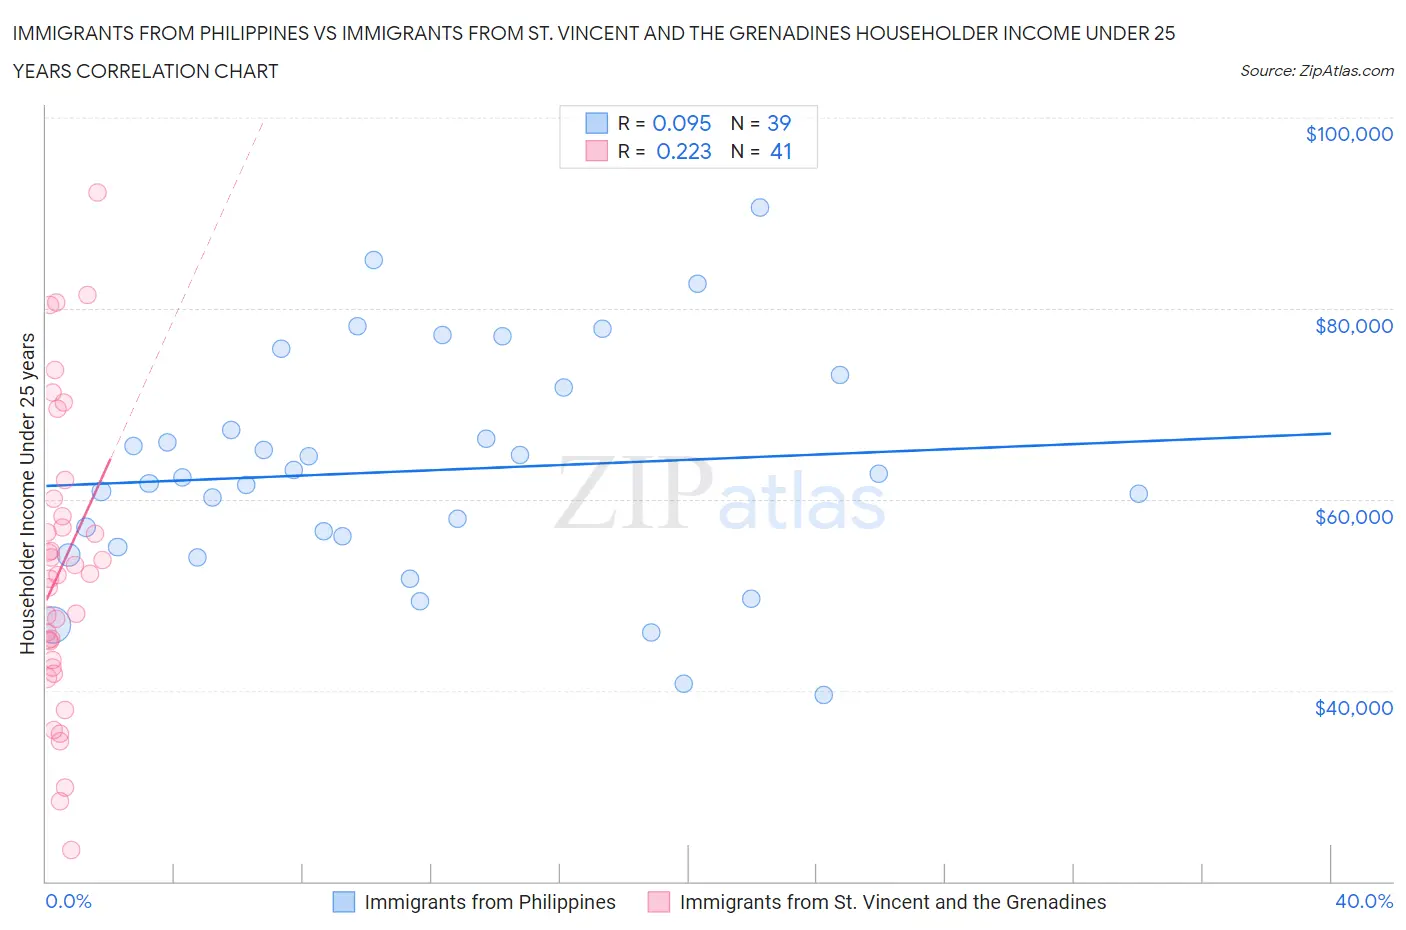 Immigrants from Philippines vs Immigrants from St. Vincent and the Grenadines Householder Income Under 25 years